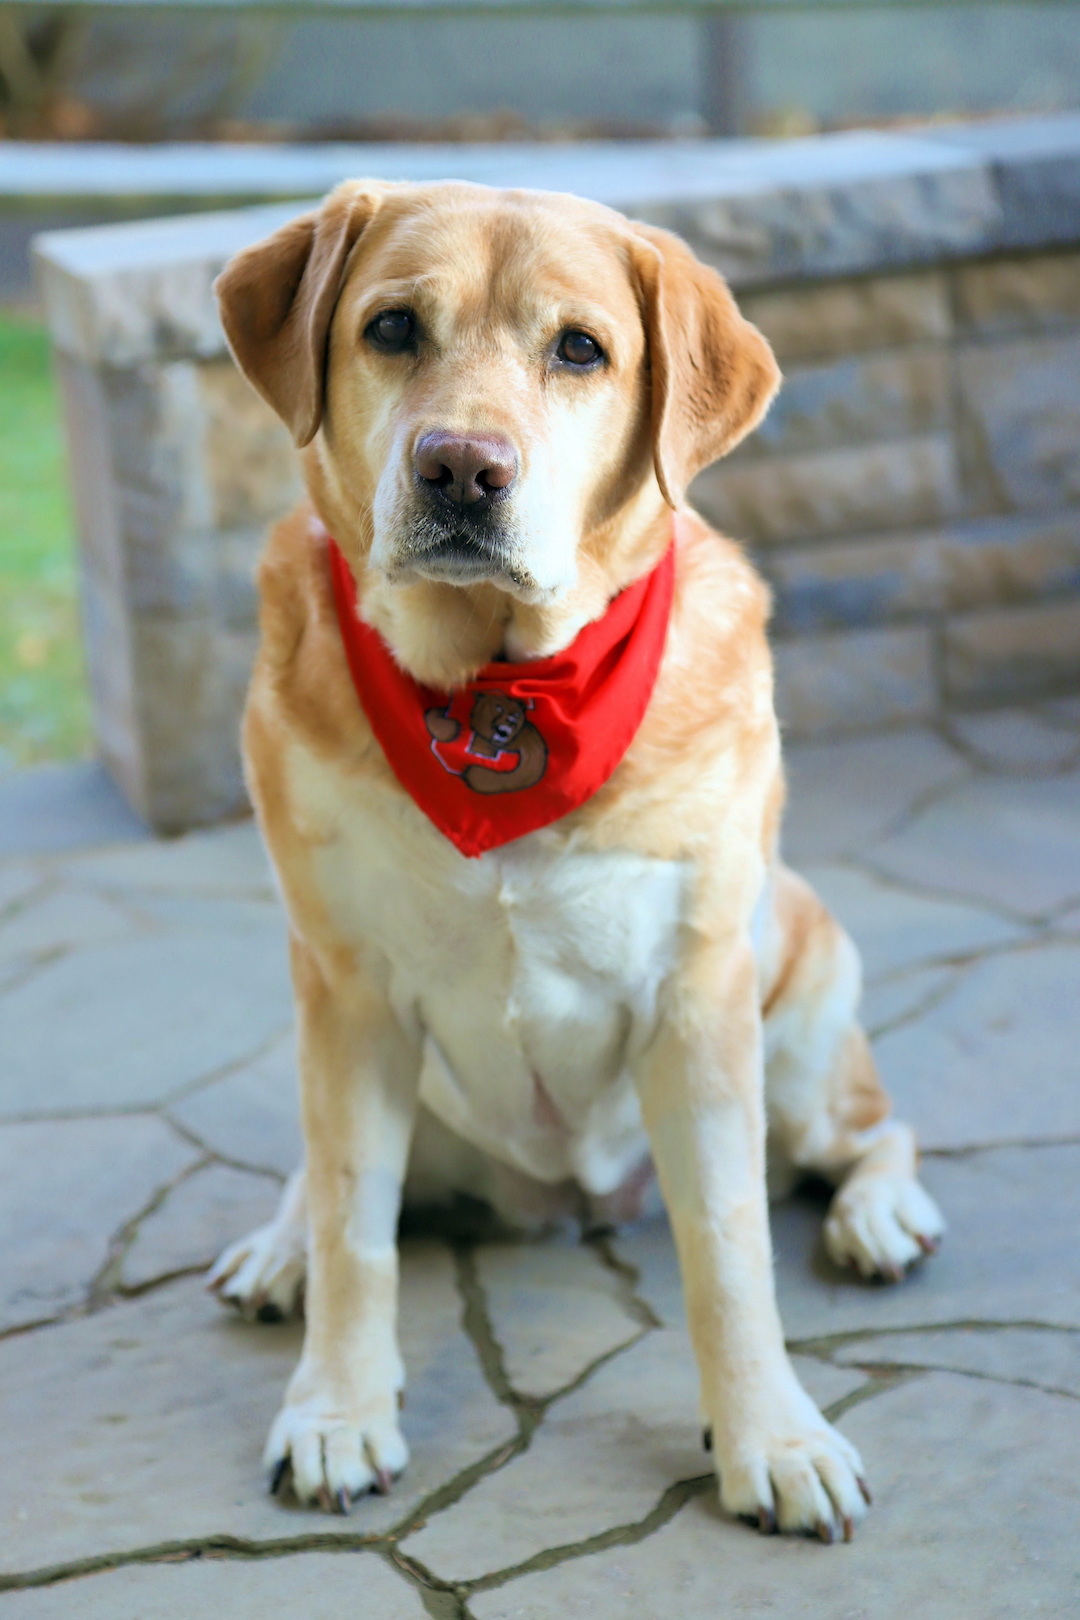 A Labrador retriever wearing a Cornell red bandana, sitting in front of a stone garden